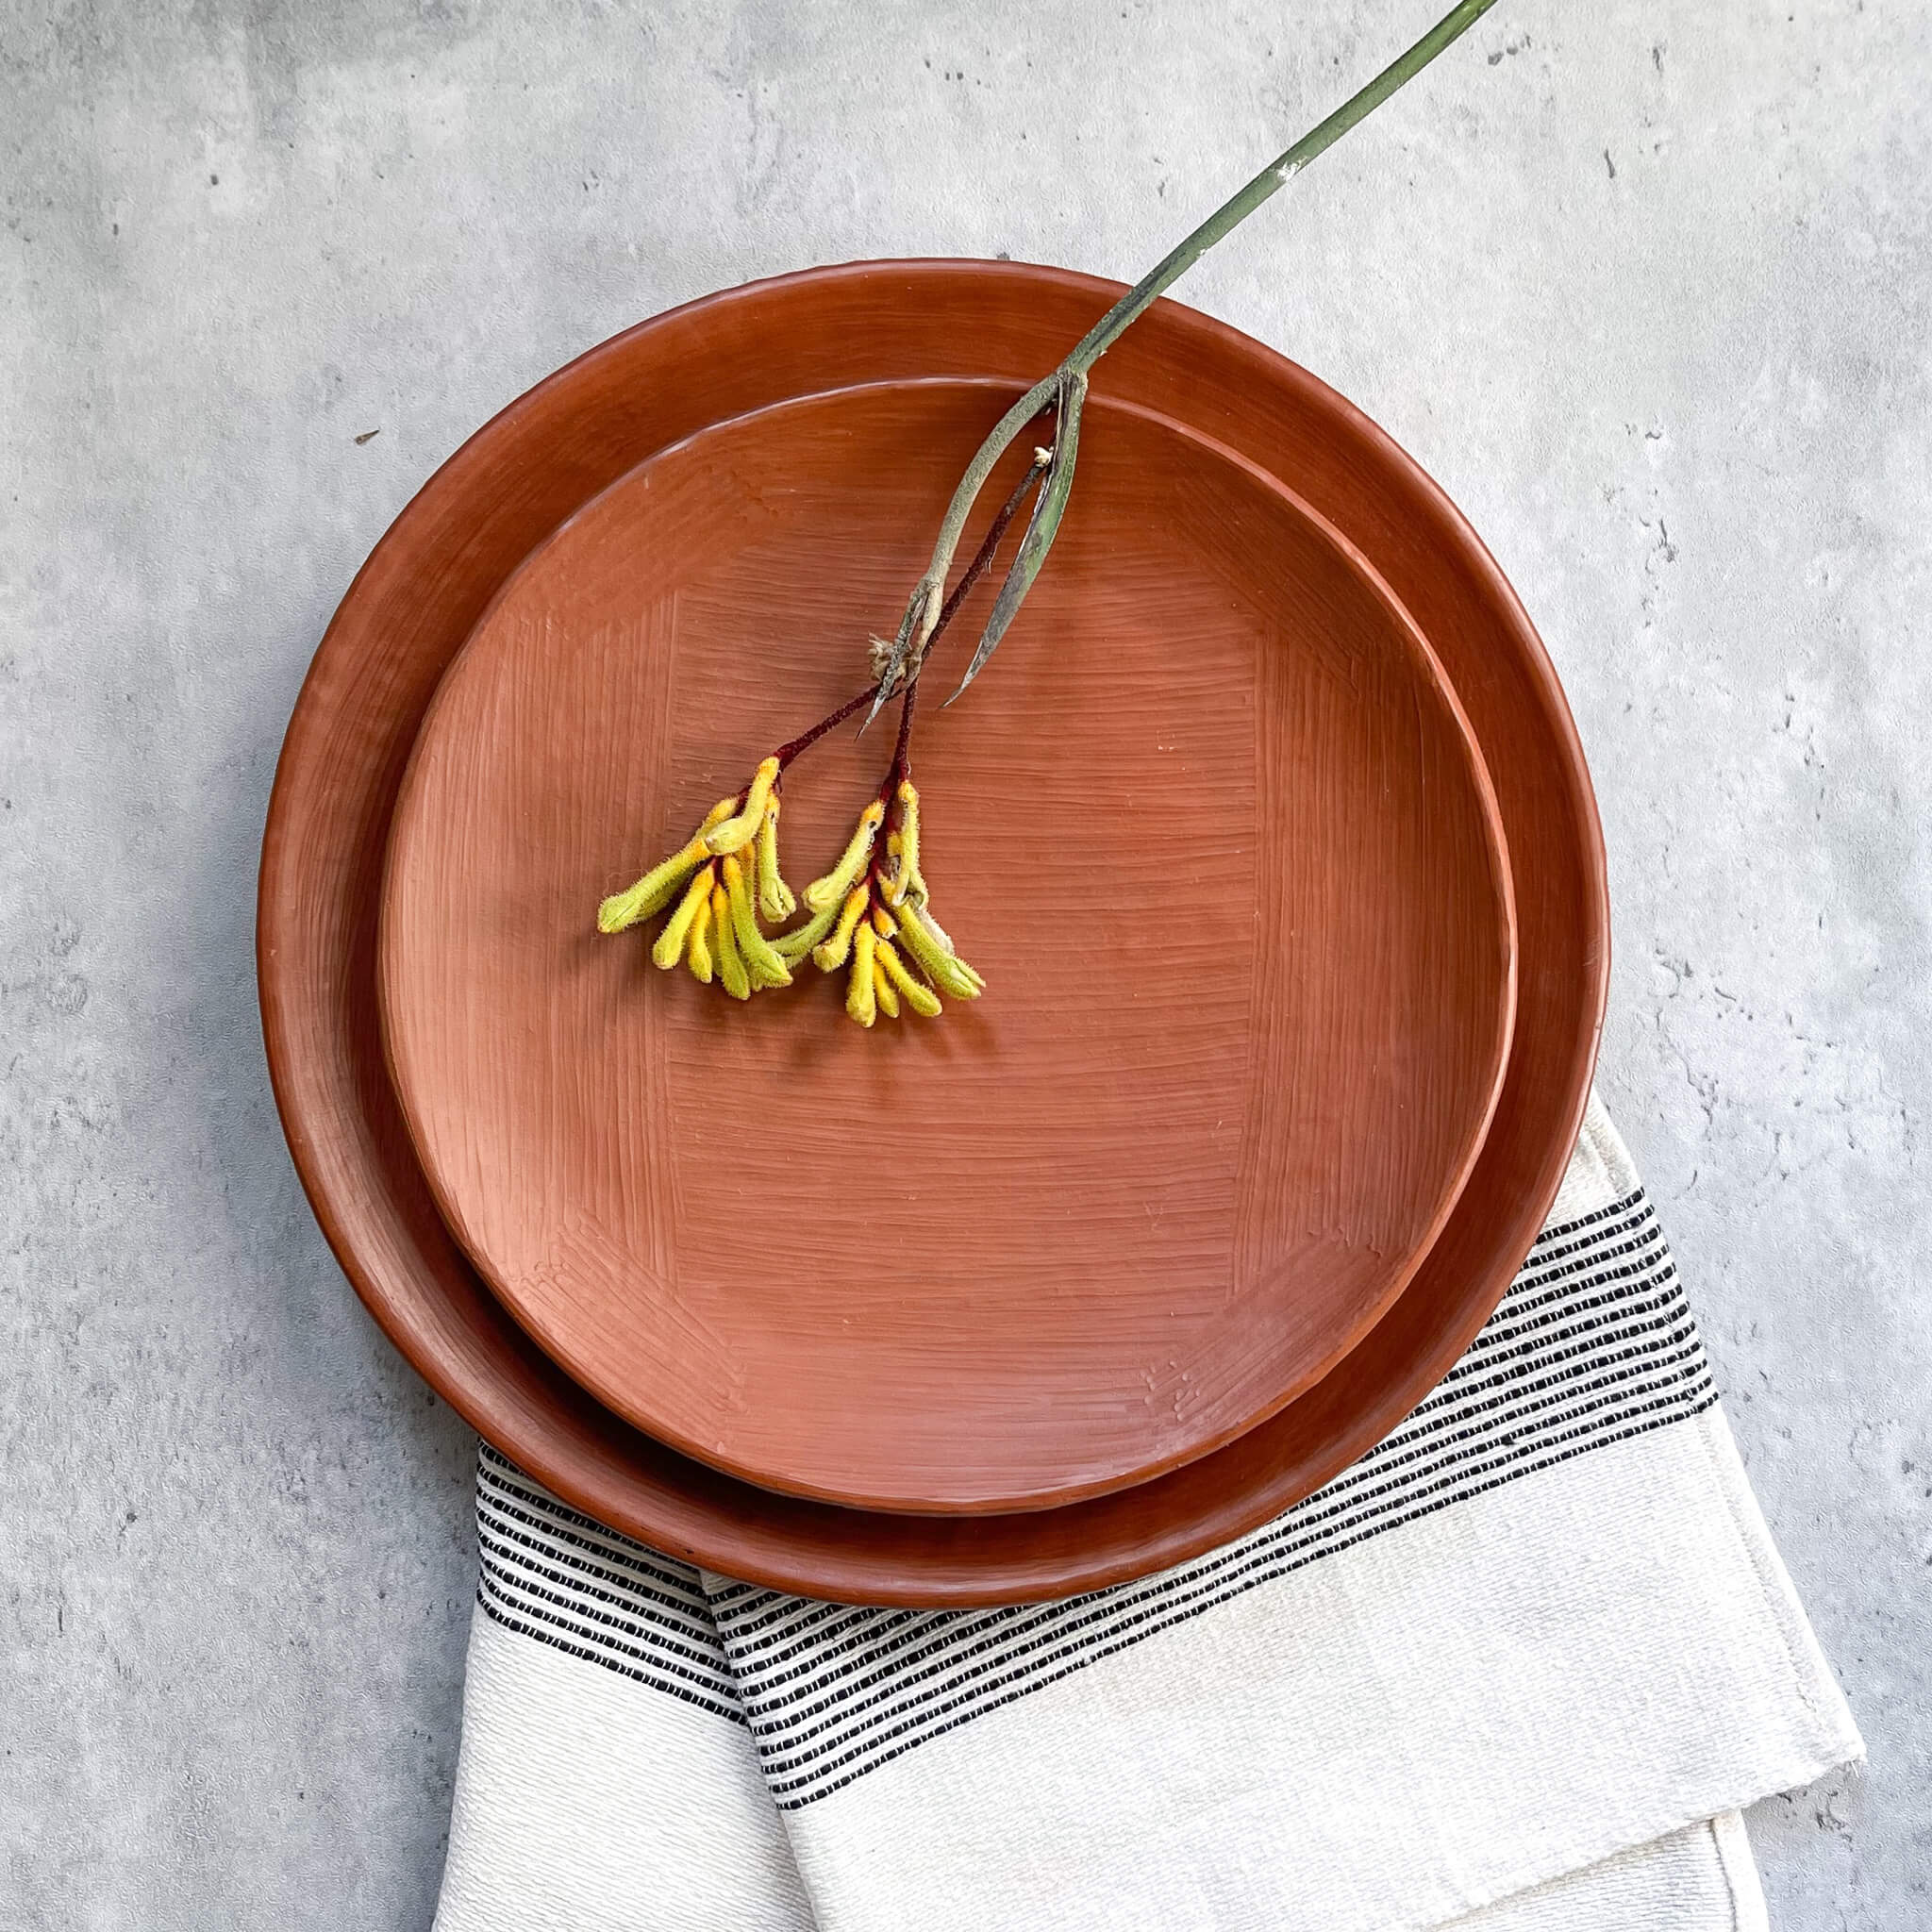 A Oaxaca red clay salad plate and dinner plate set, a top a cotton towel with a floral sprig.